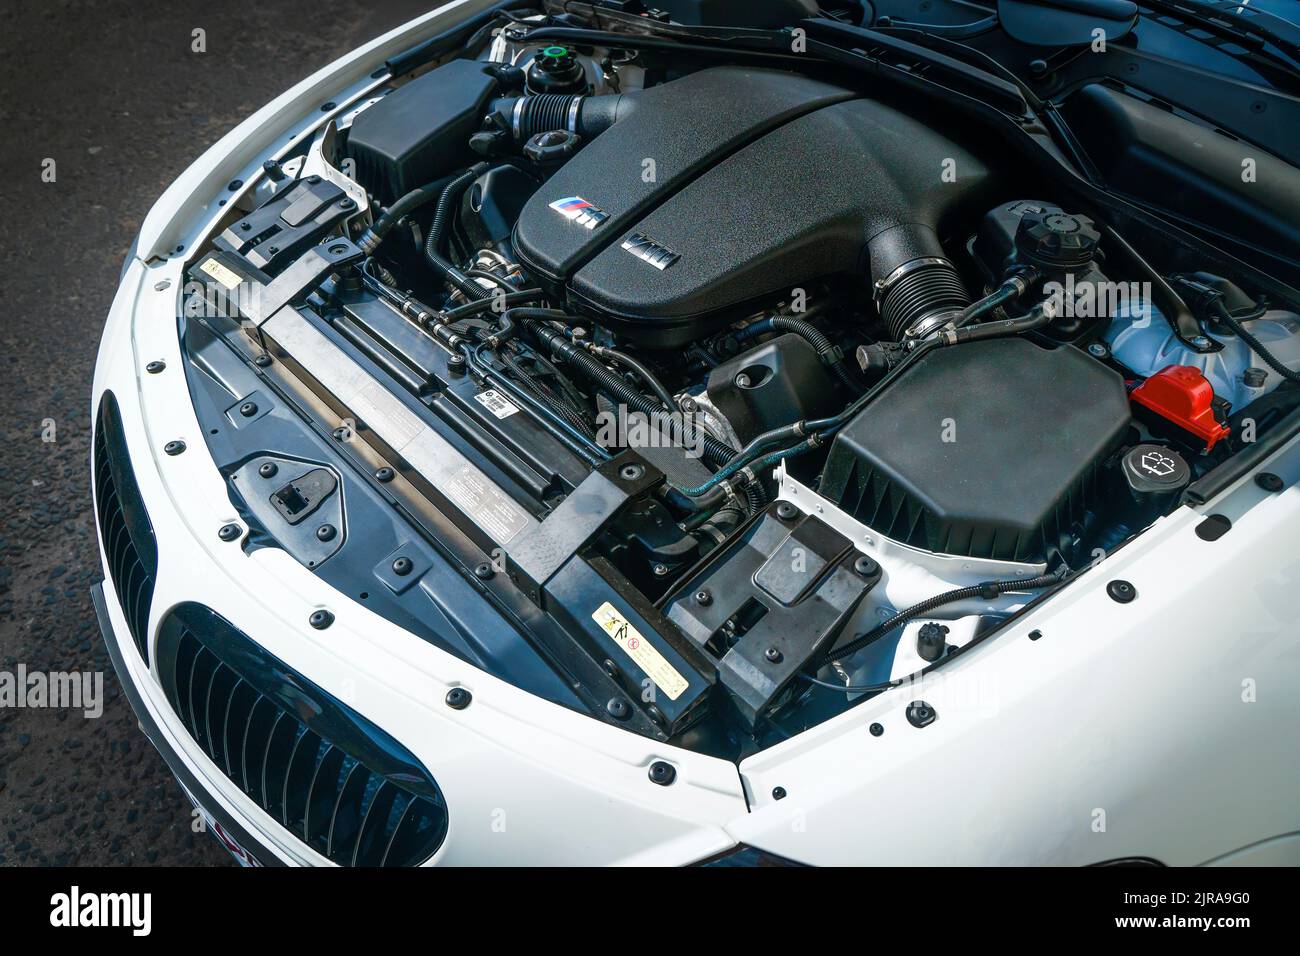 Berlin, Germany - August 14, 2022: BMW engine. Modern V10 engine in a German premium sports car. Automotive, motors, manufacturing concept. High quality photo Stock Photo